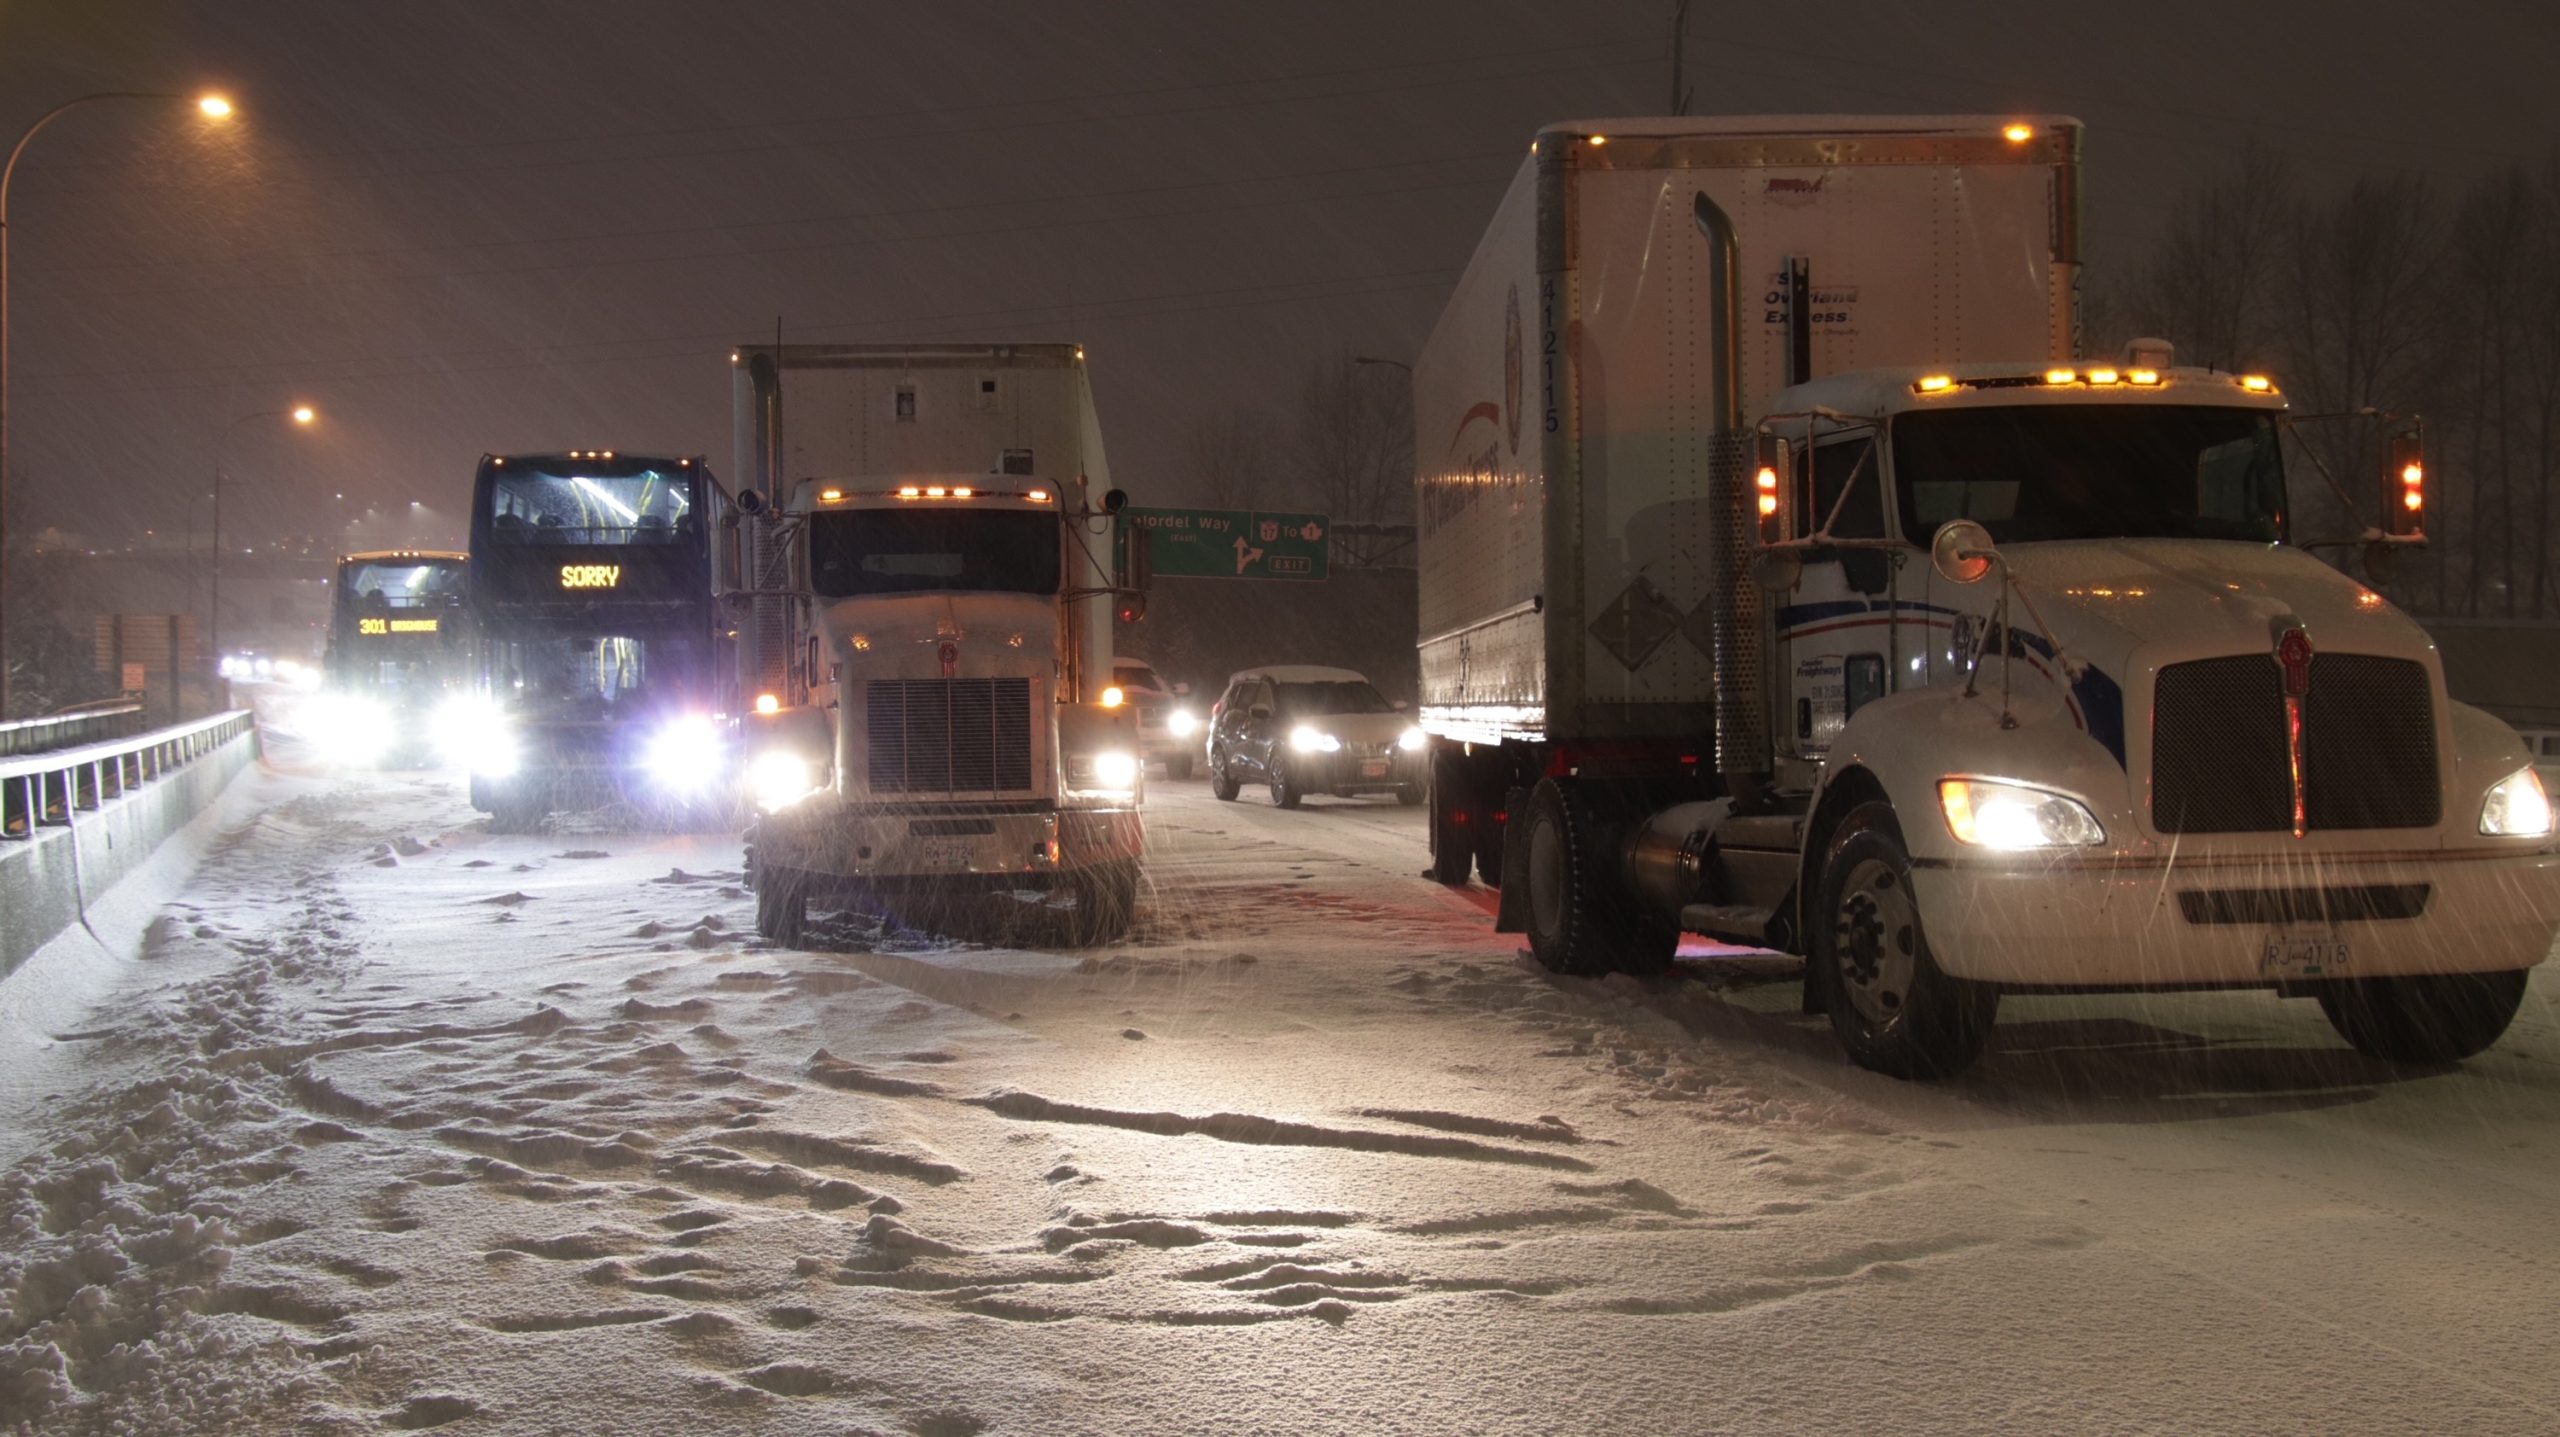 Trucks and other vehicles on snow-covered roads amid major gridlock following a storm in Metro Vancouver